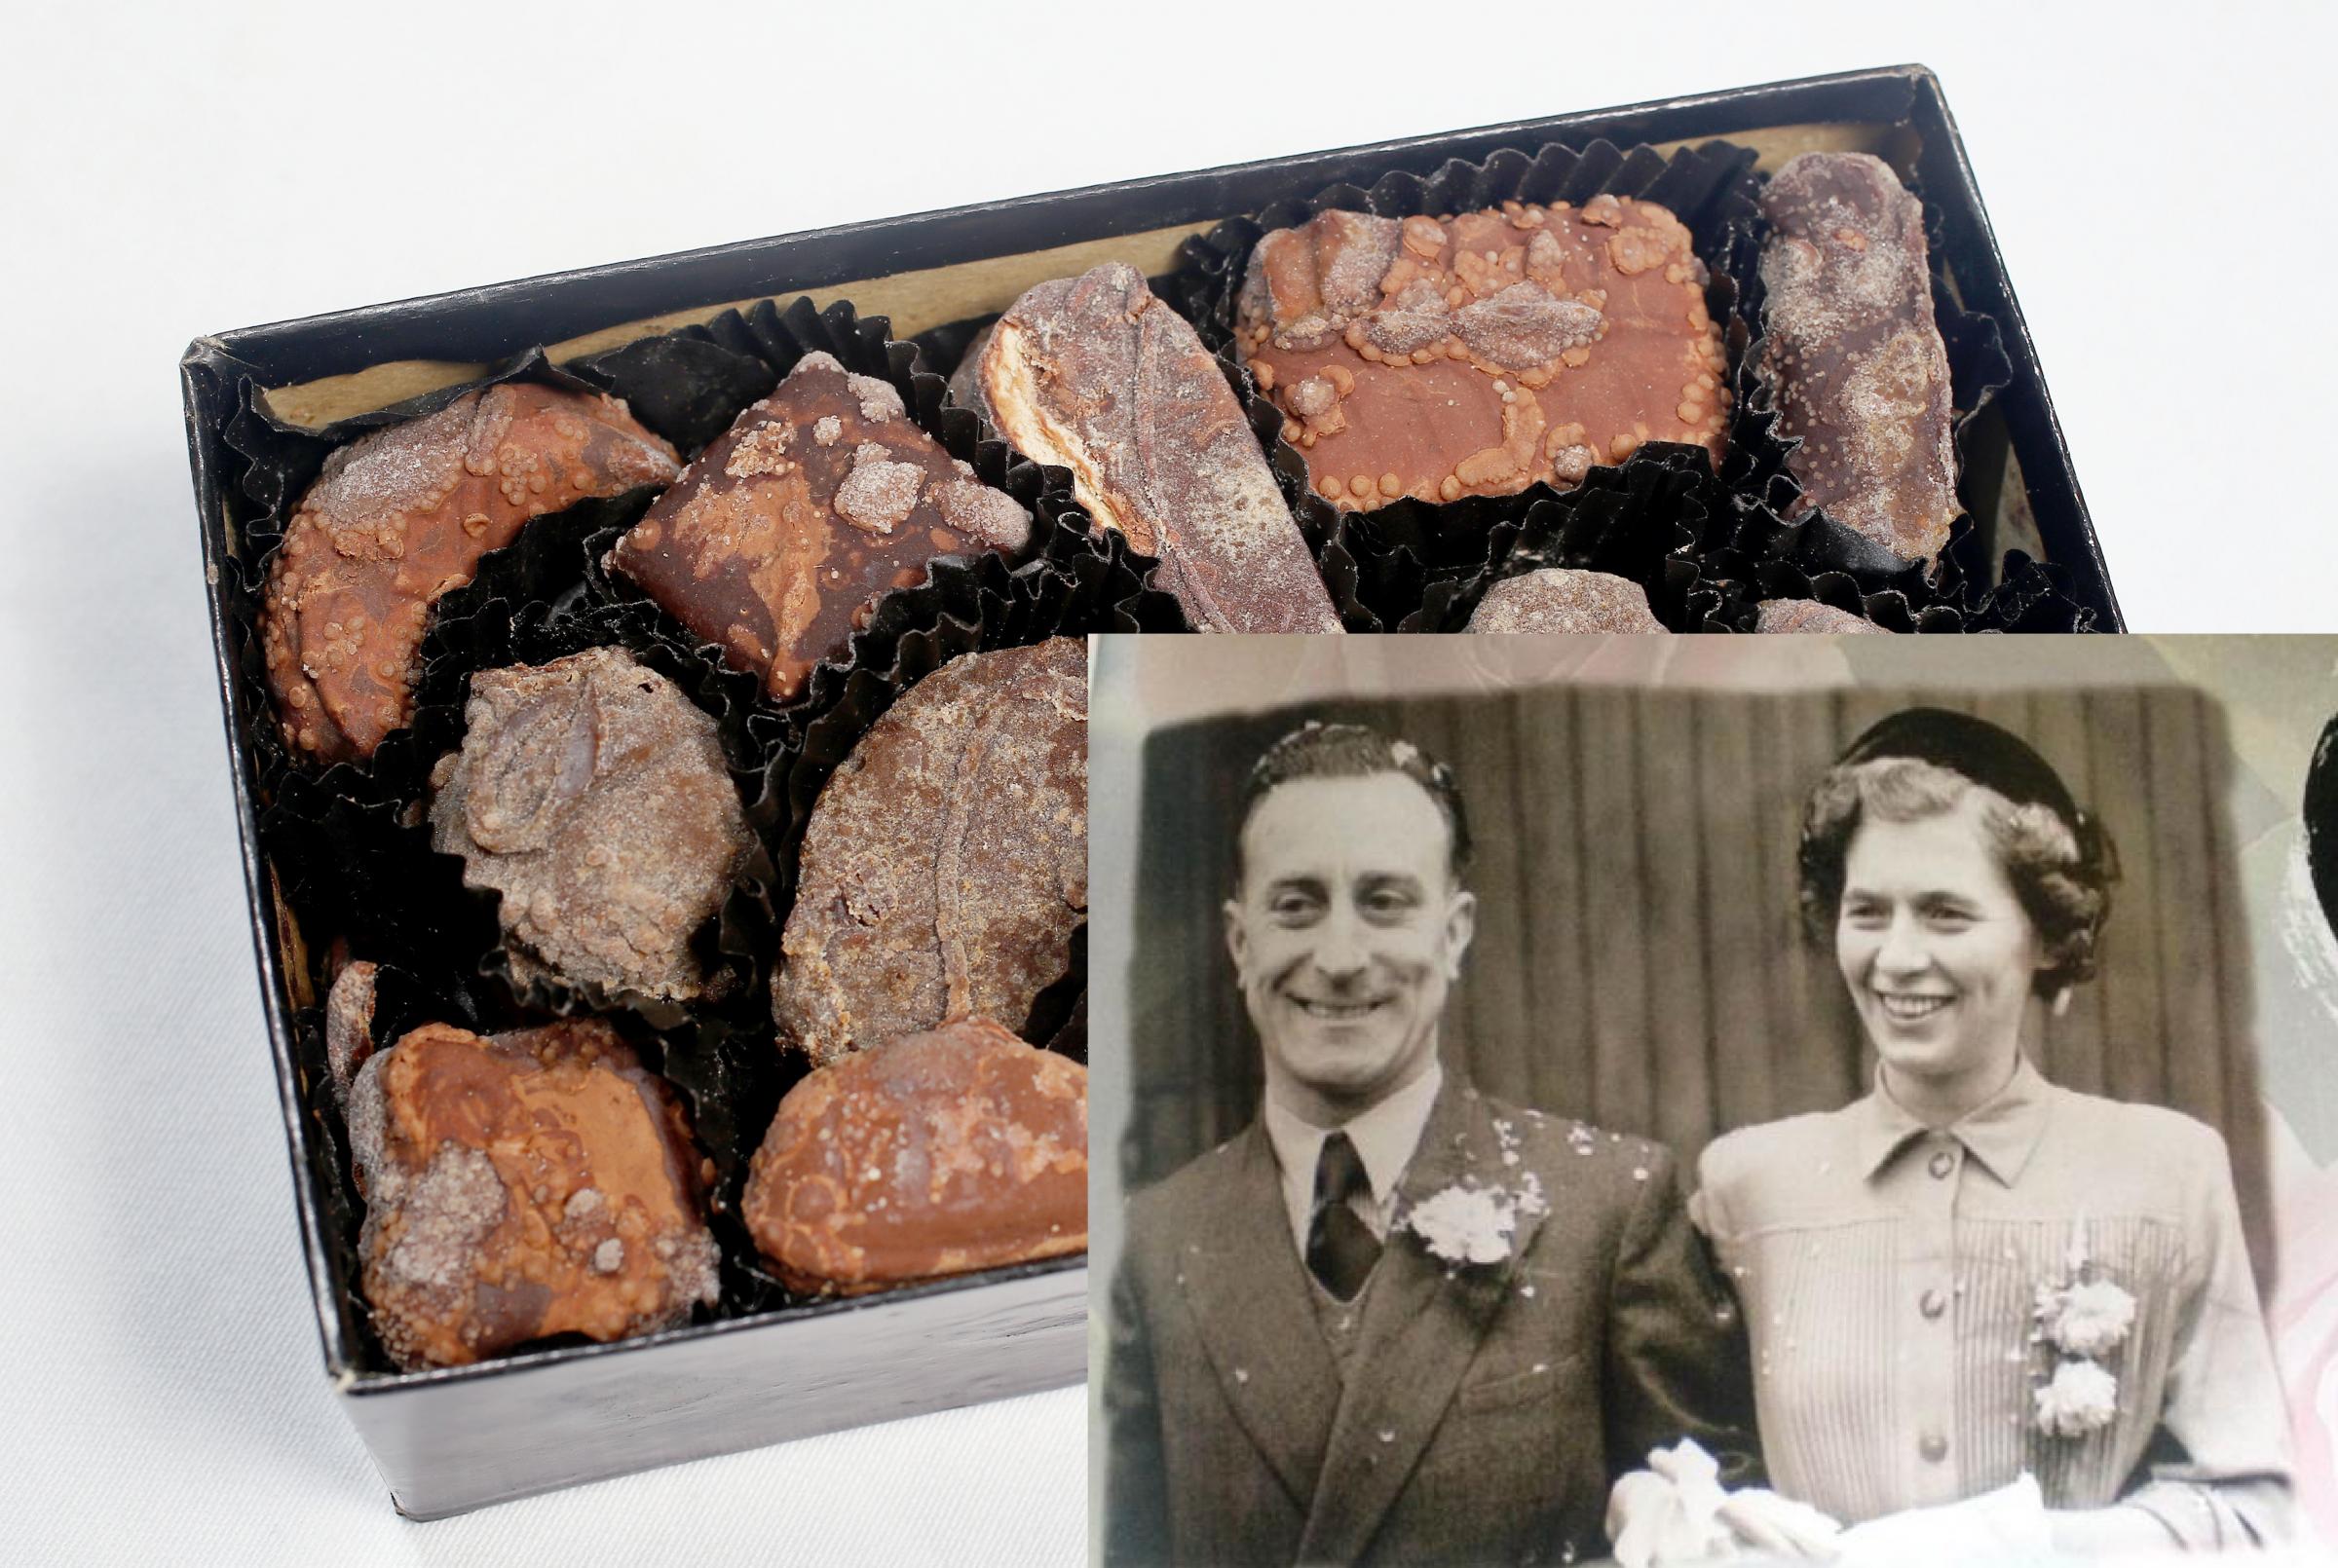 104-year-old Bert donates the 66-year-old box of chocolates he kept throughout his marriage